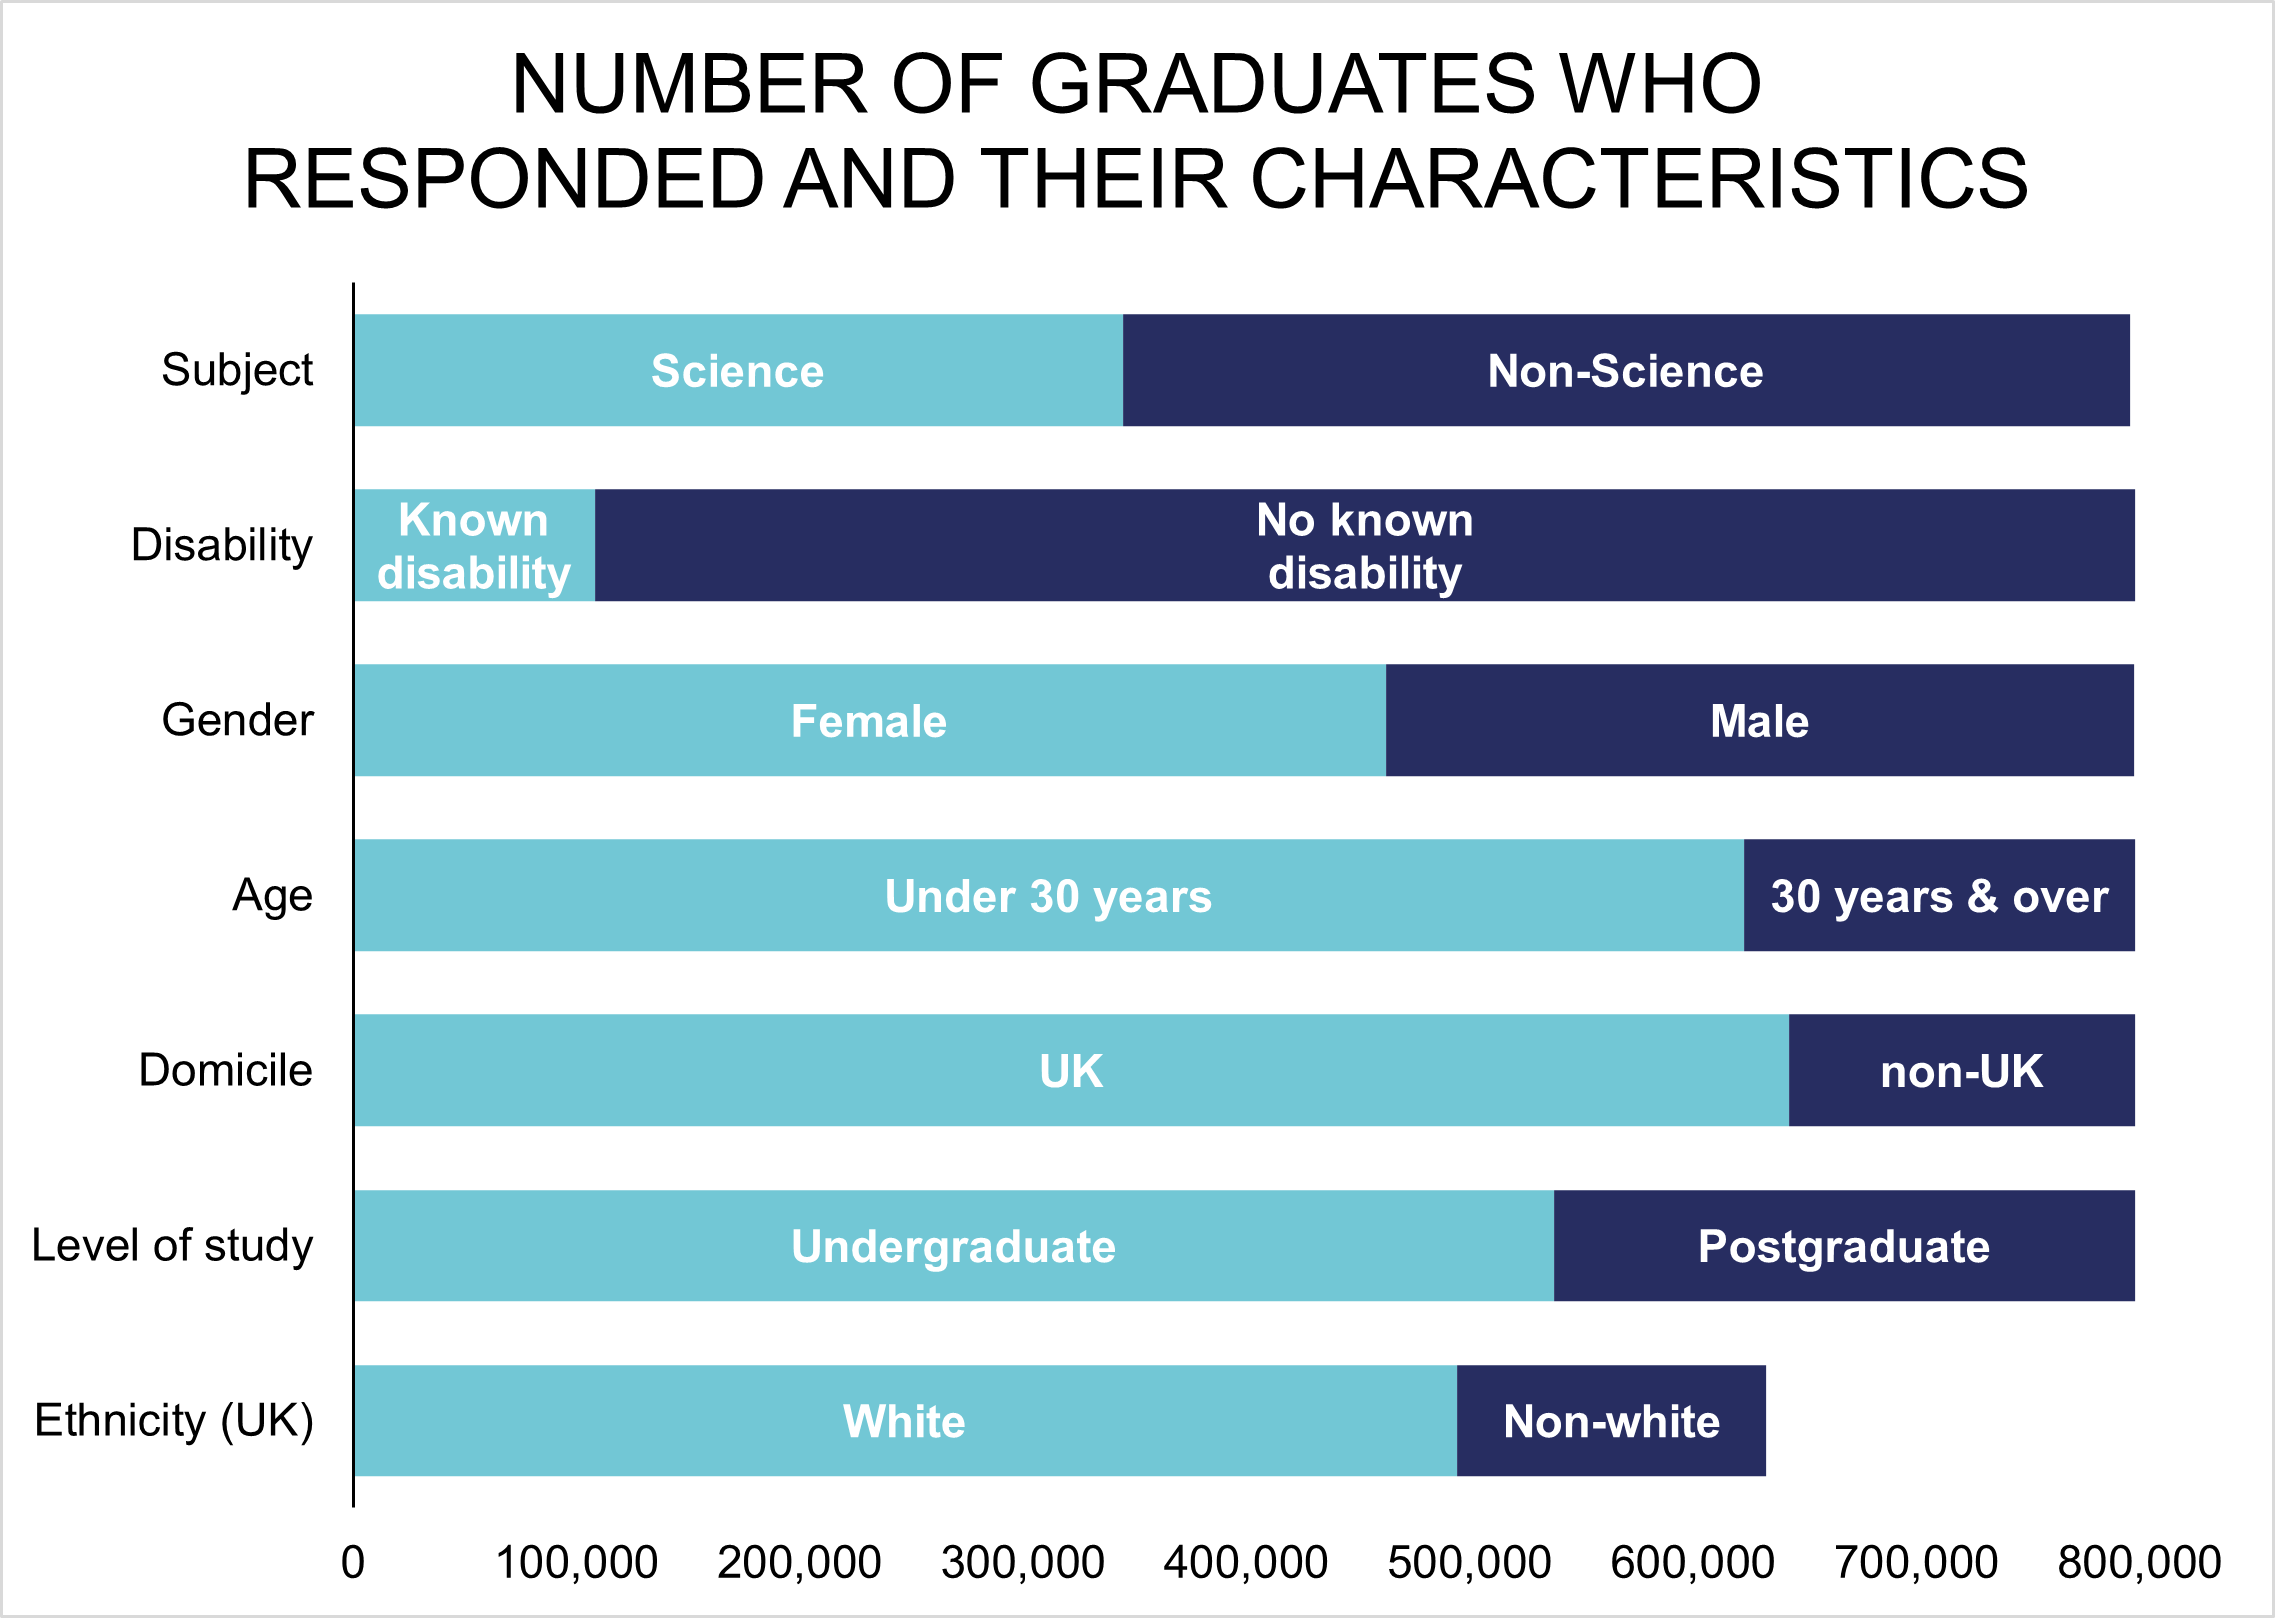 Bar chart showing number of graduates who responded and their characteristics for 2017/18 to 2018/19. Source data available below.